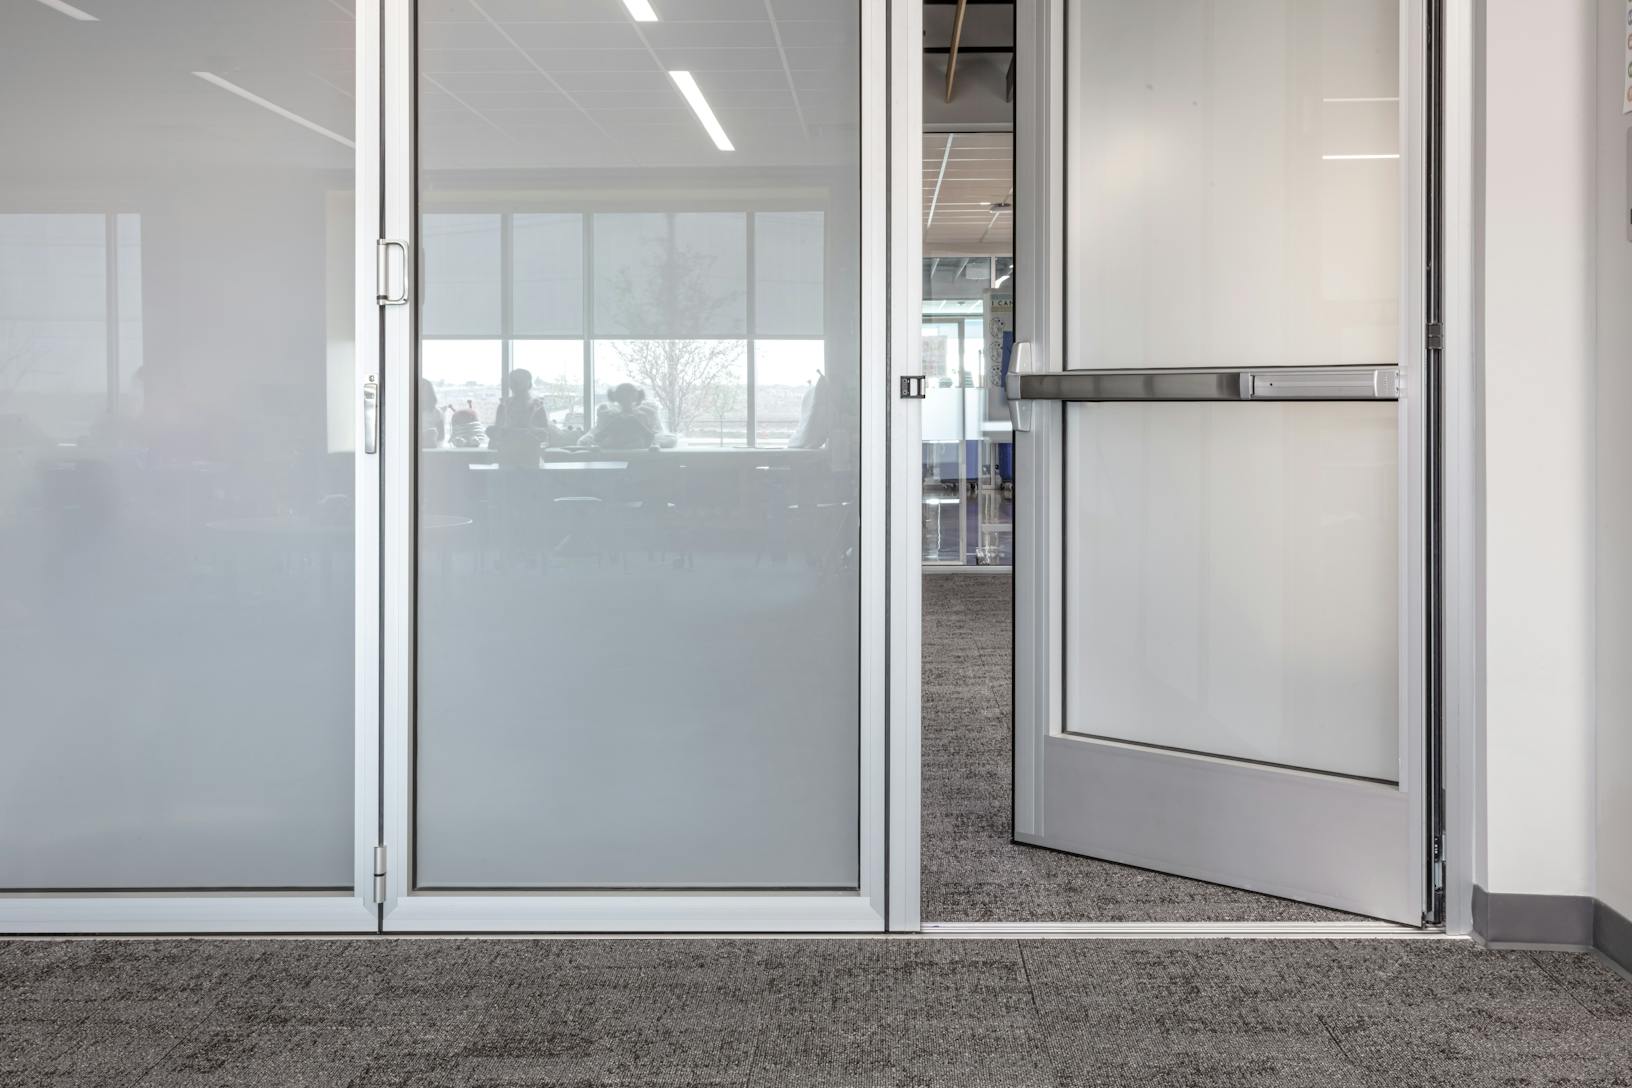 Acoustical movable glass walls at Minett Elementary- Swing door